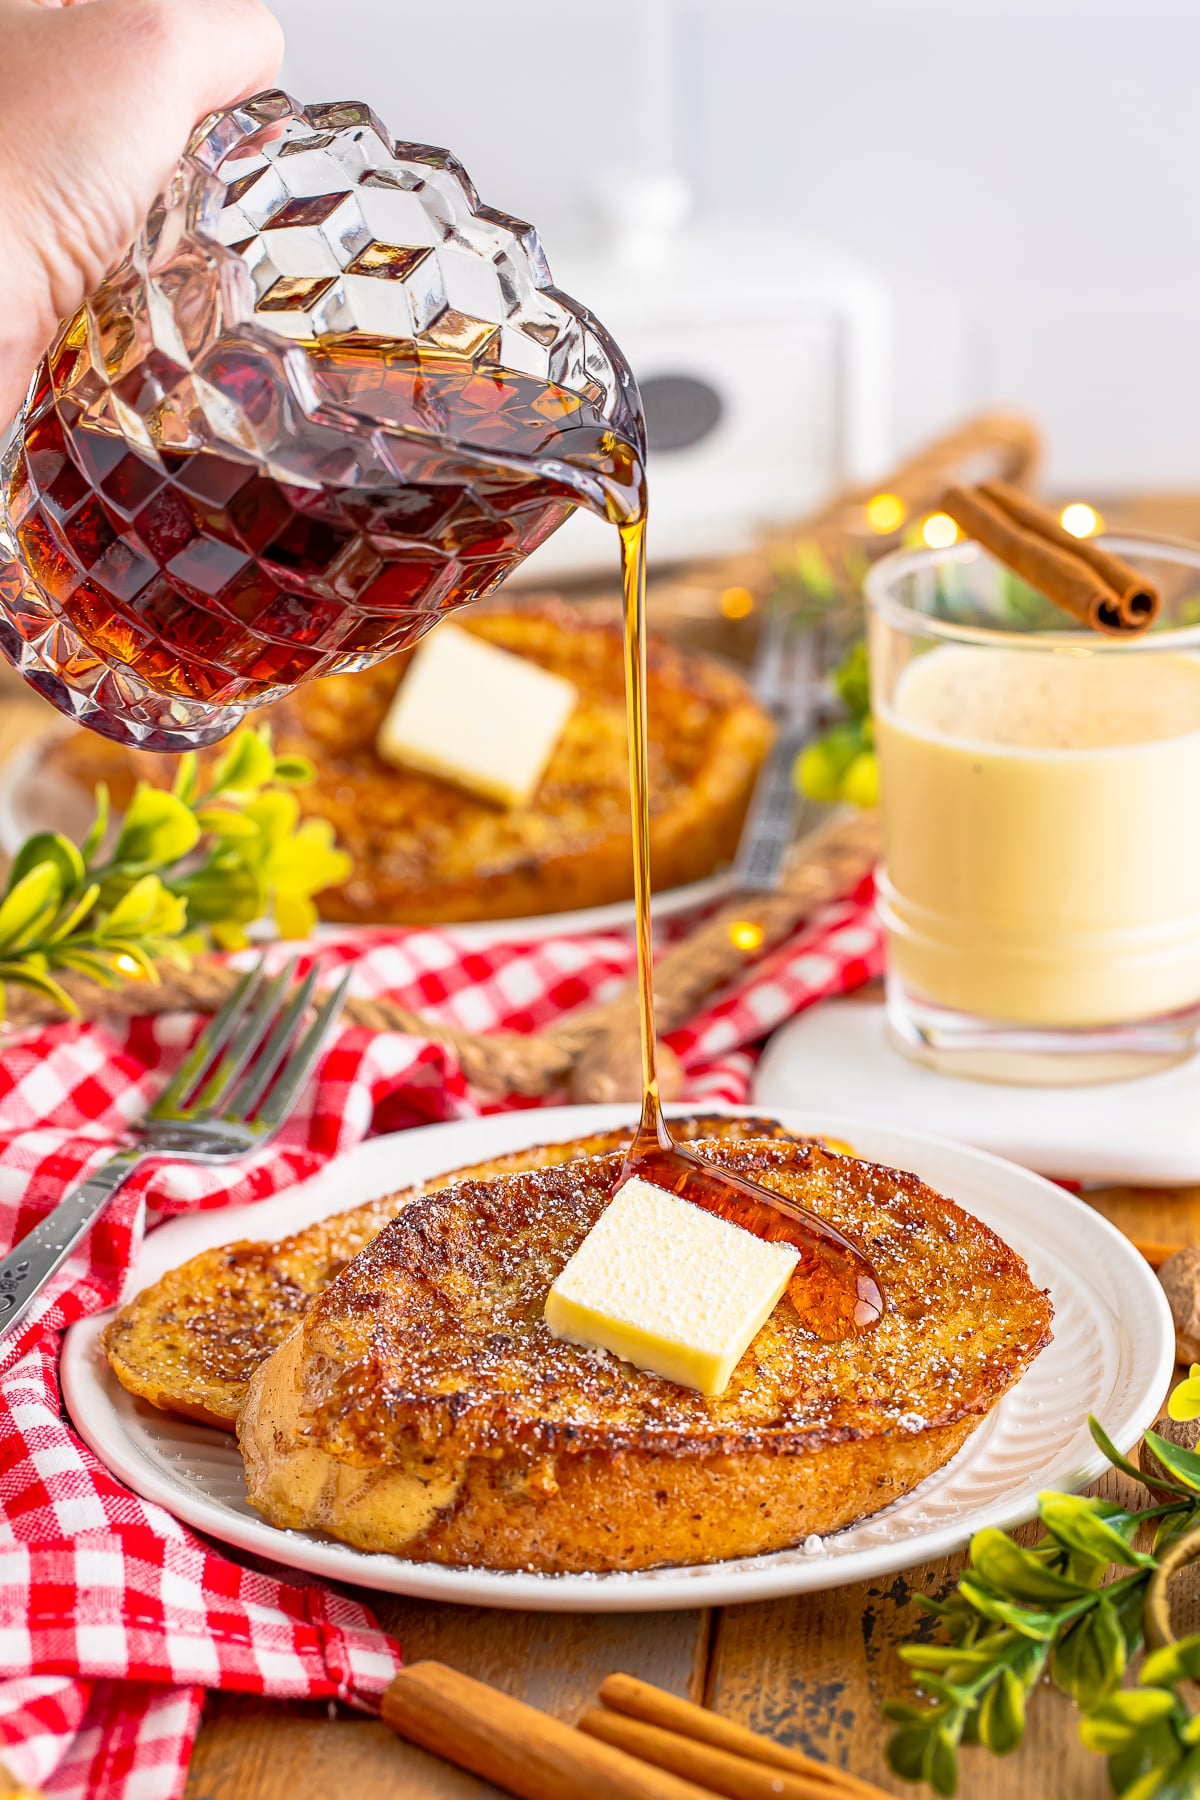 maple syrup being poured on eggnog french toast